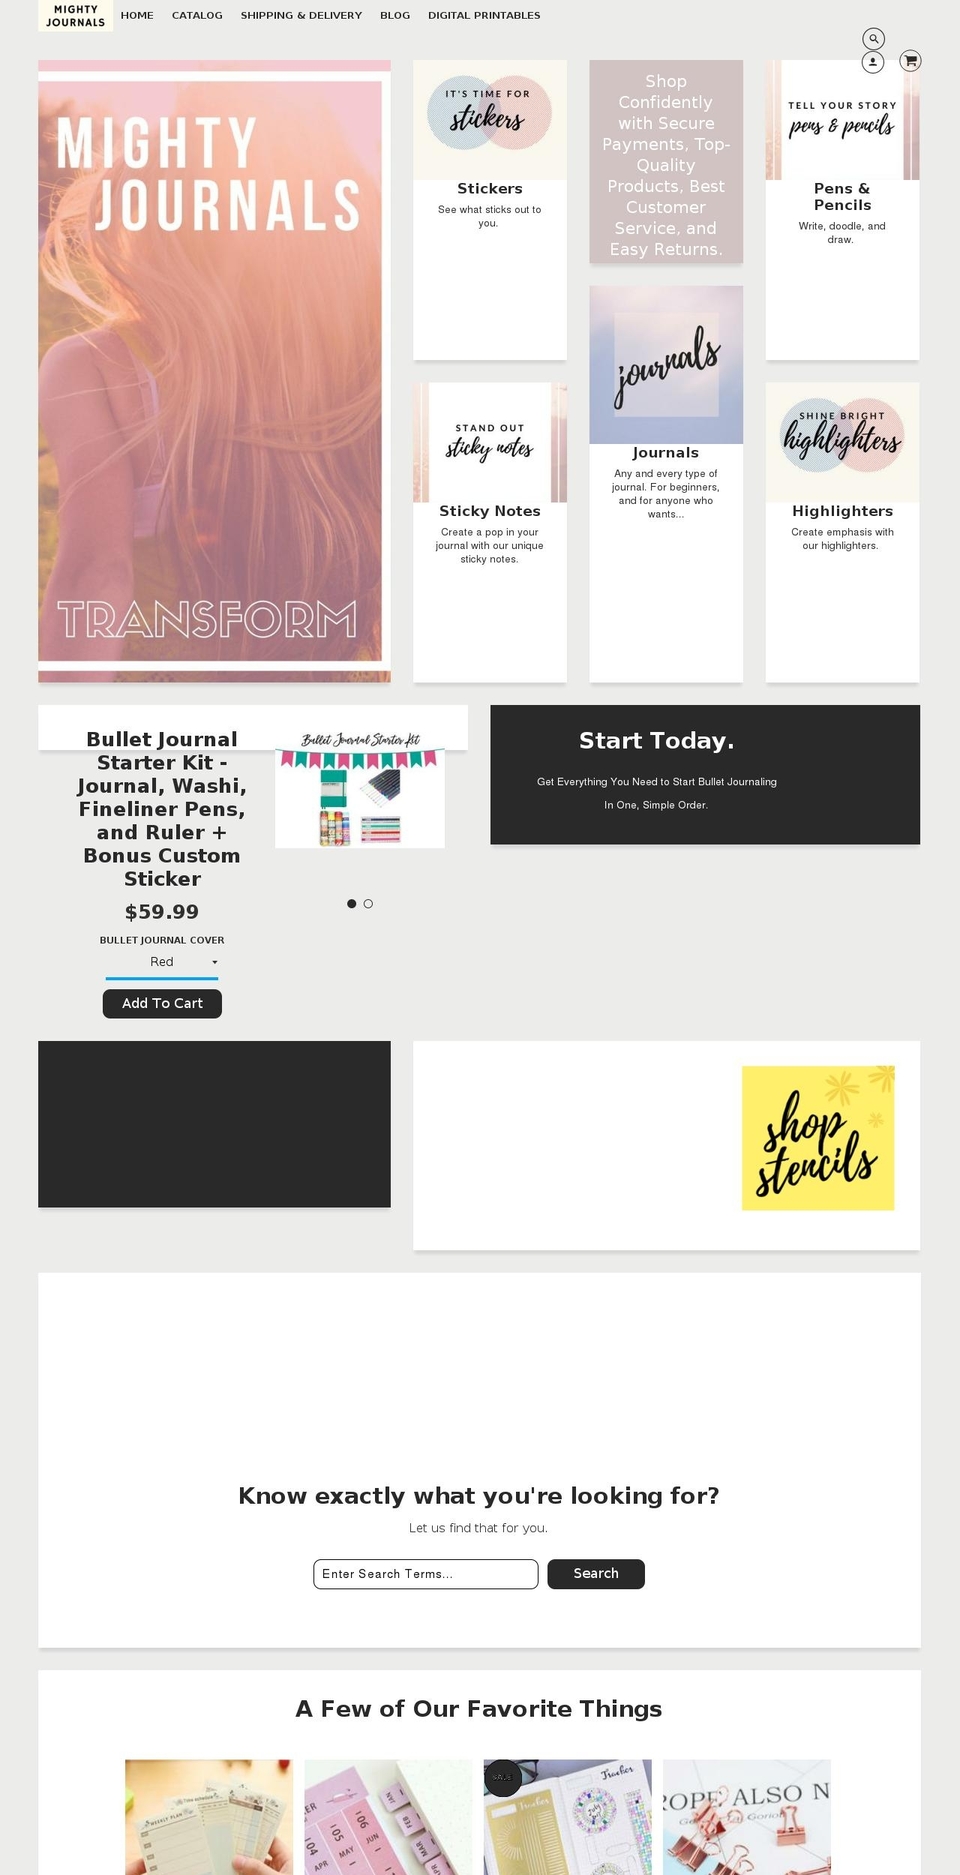 Loft Shopify theme site example mightyjournals.com